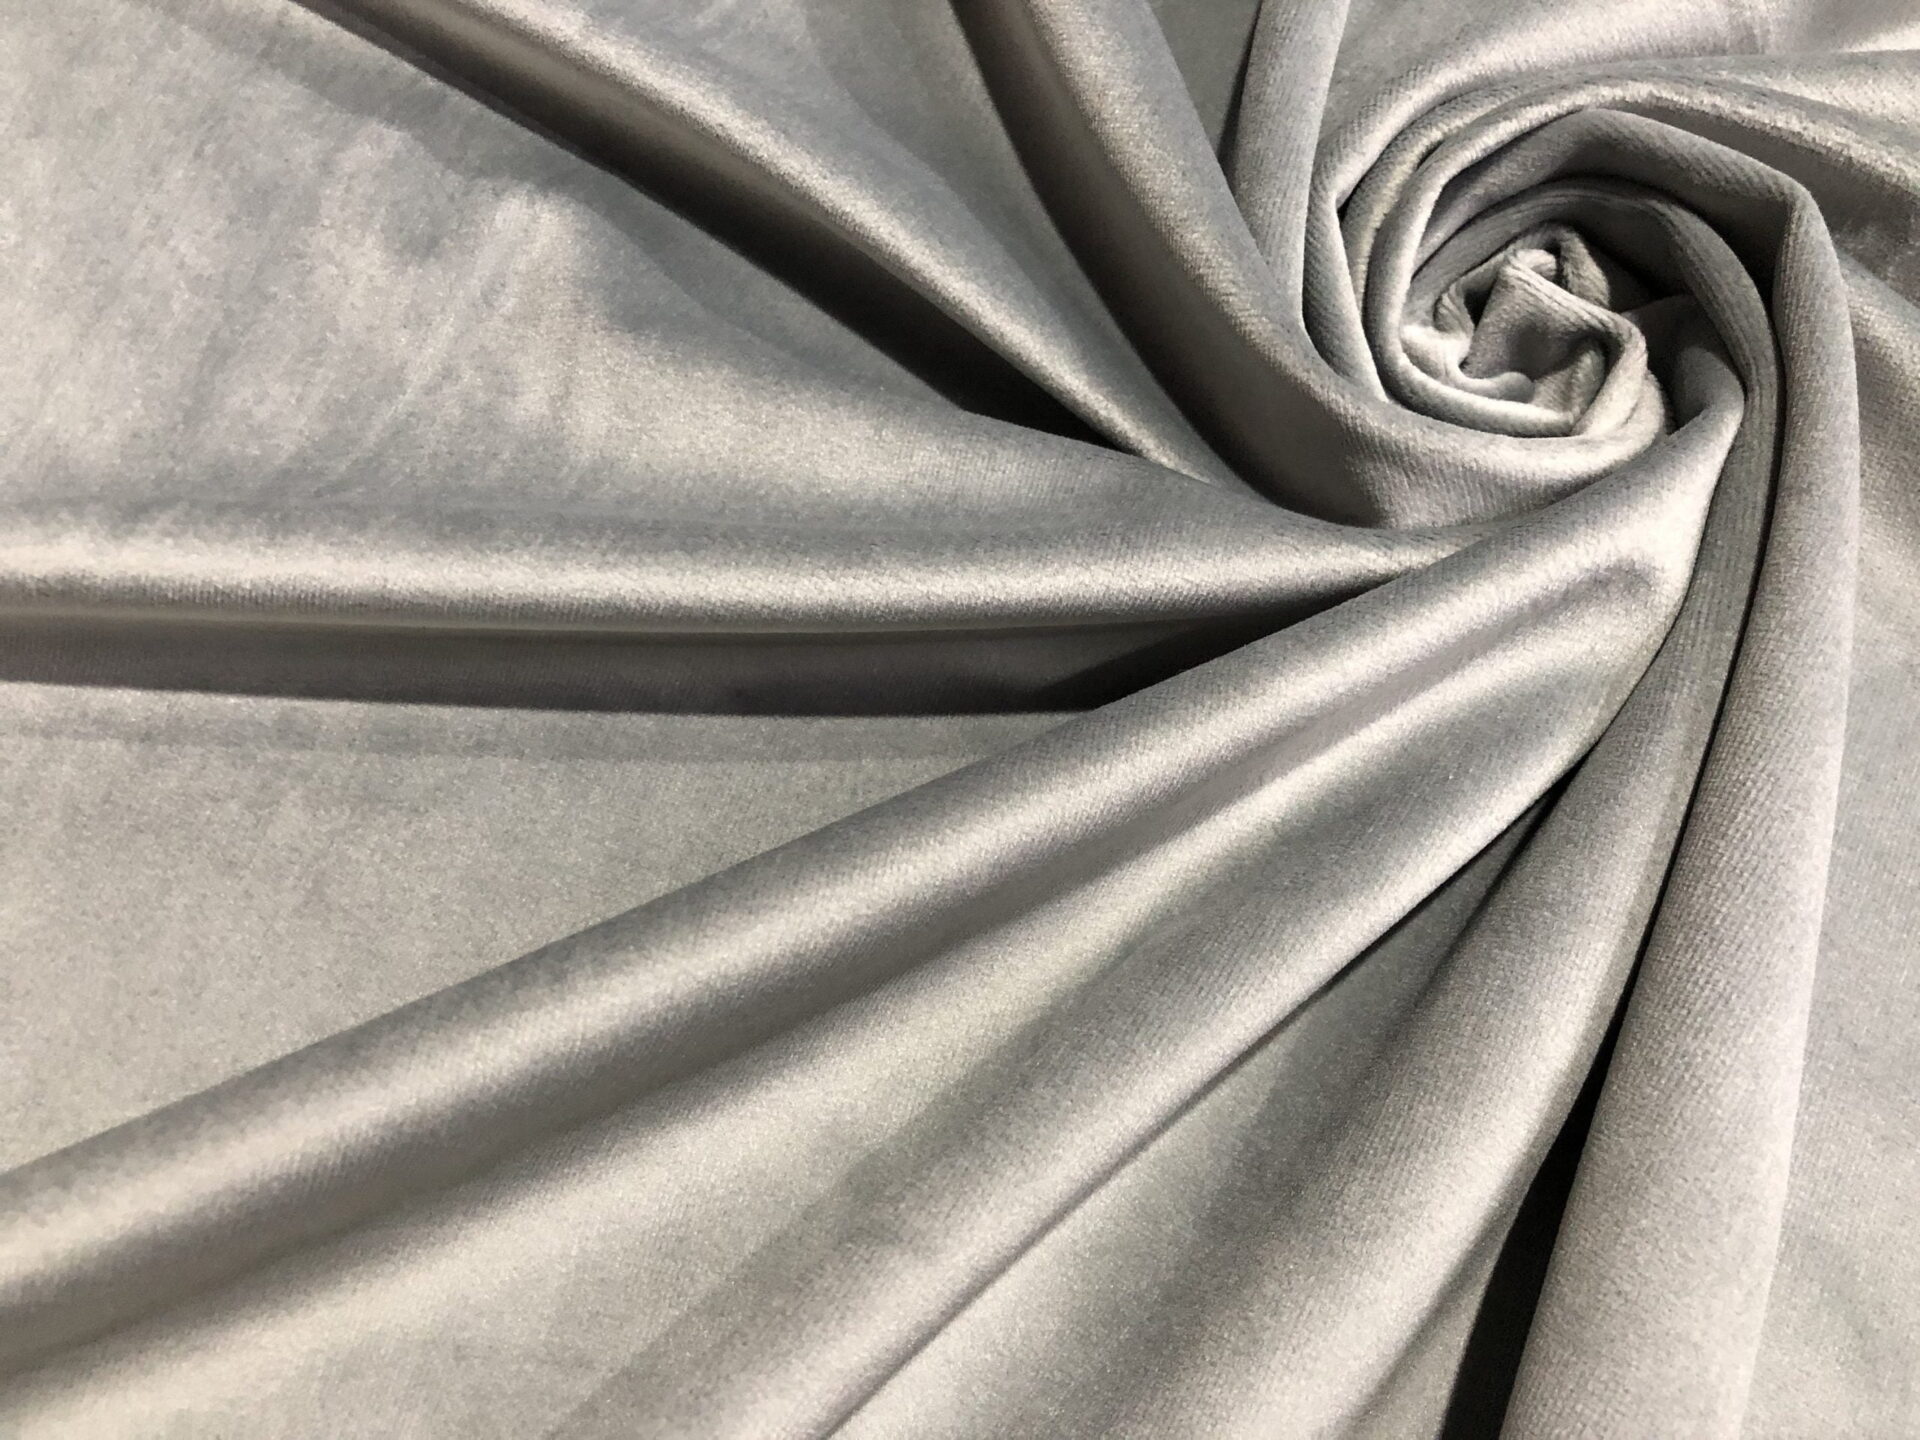 lux velvet fabric super soft strong velour material home decor curtains upholstery dressmaking 59 150 cm wide silver grey 606f1439 scaled